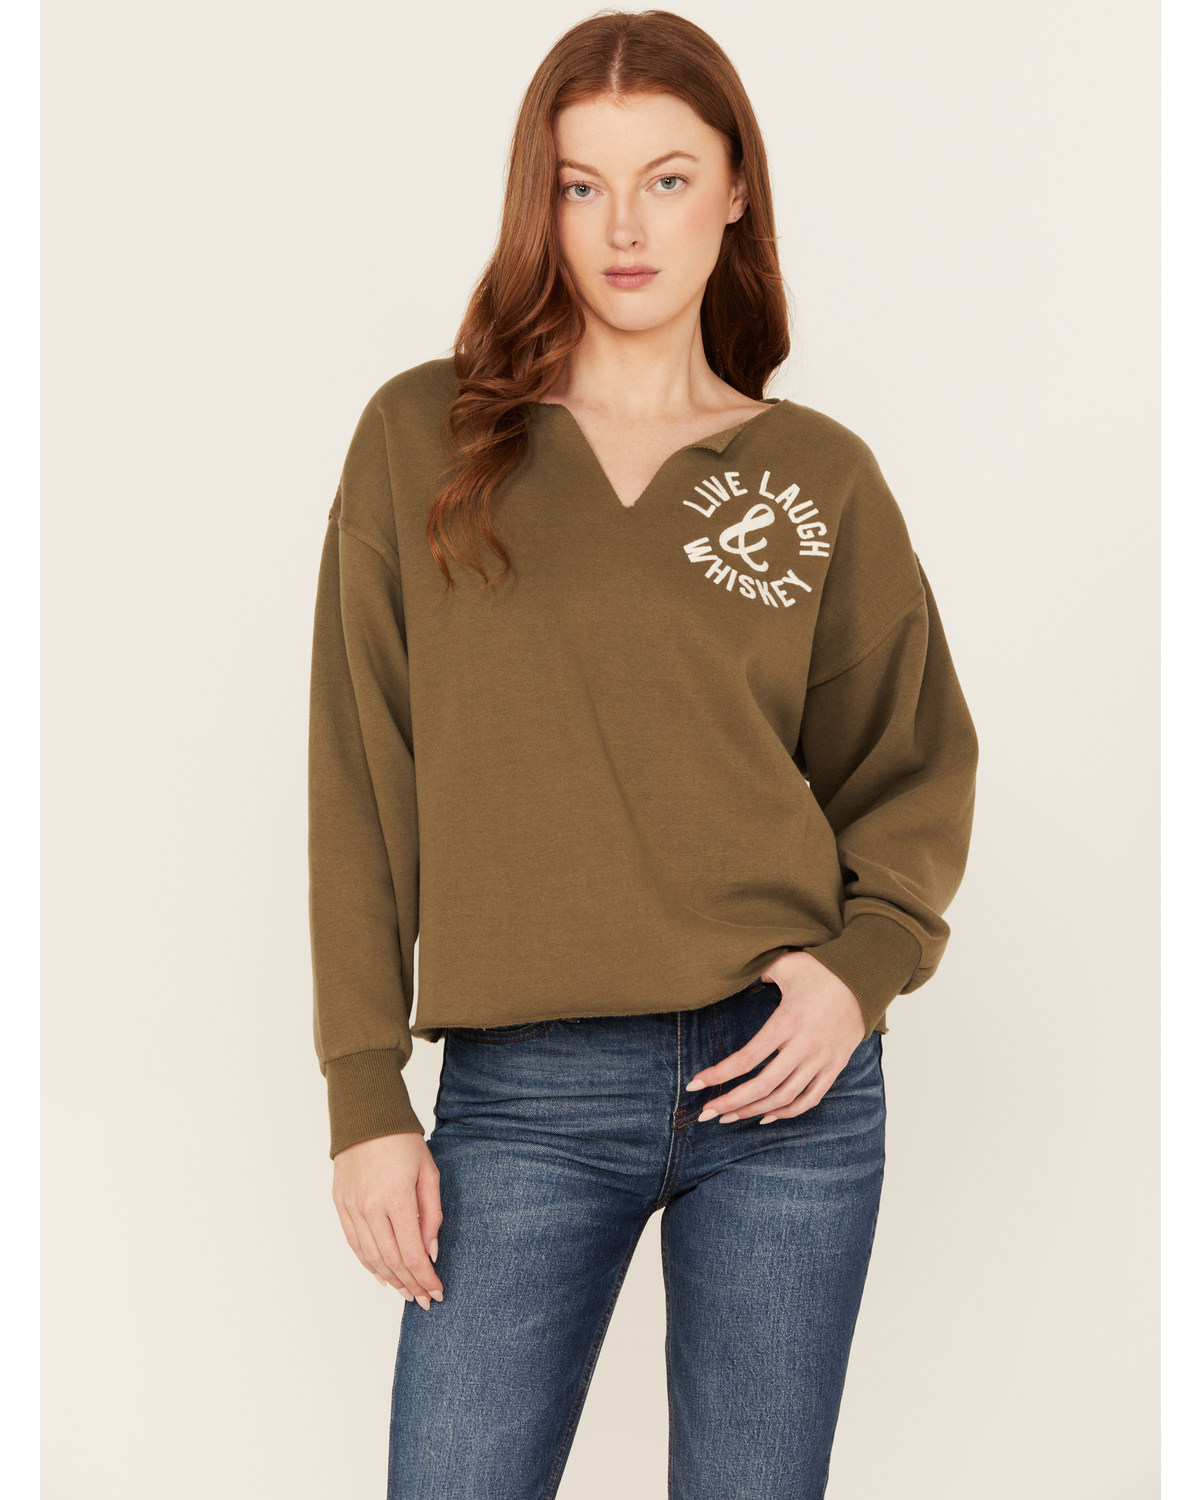 Cleo + Wolf Women's Live Laugh Whiskey Oversized Cropped Pullover